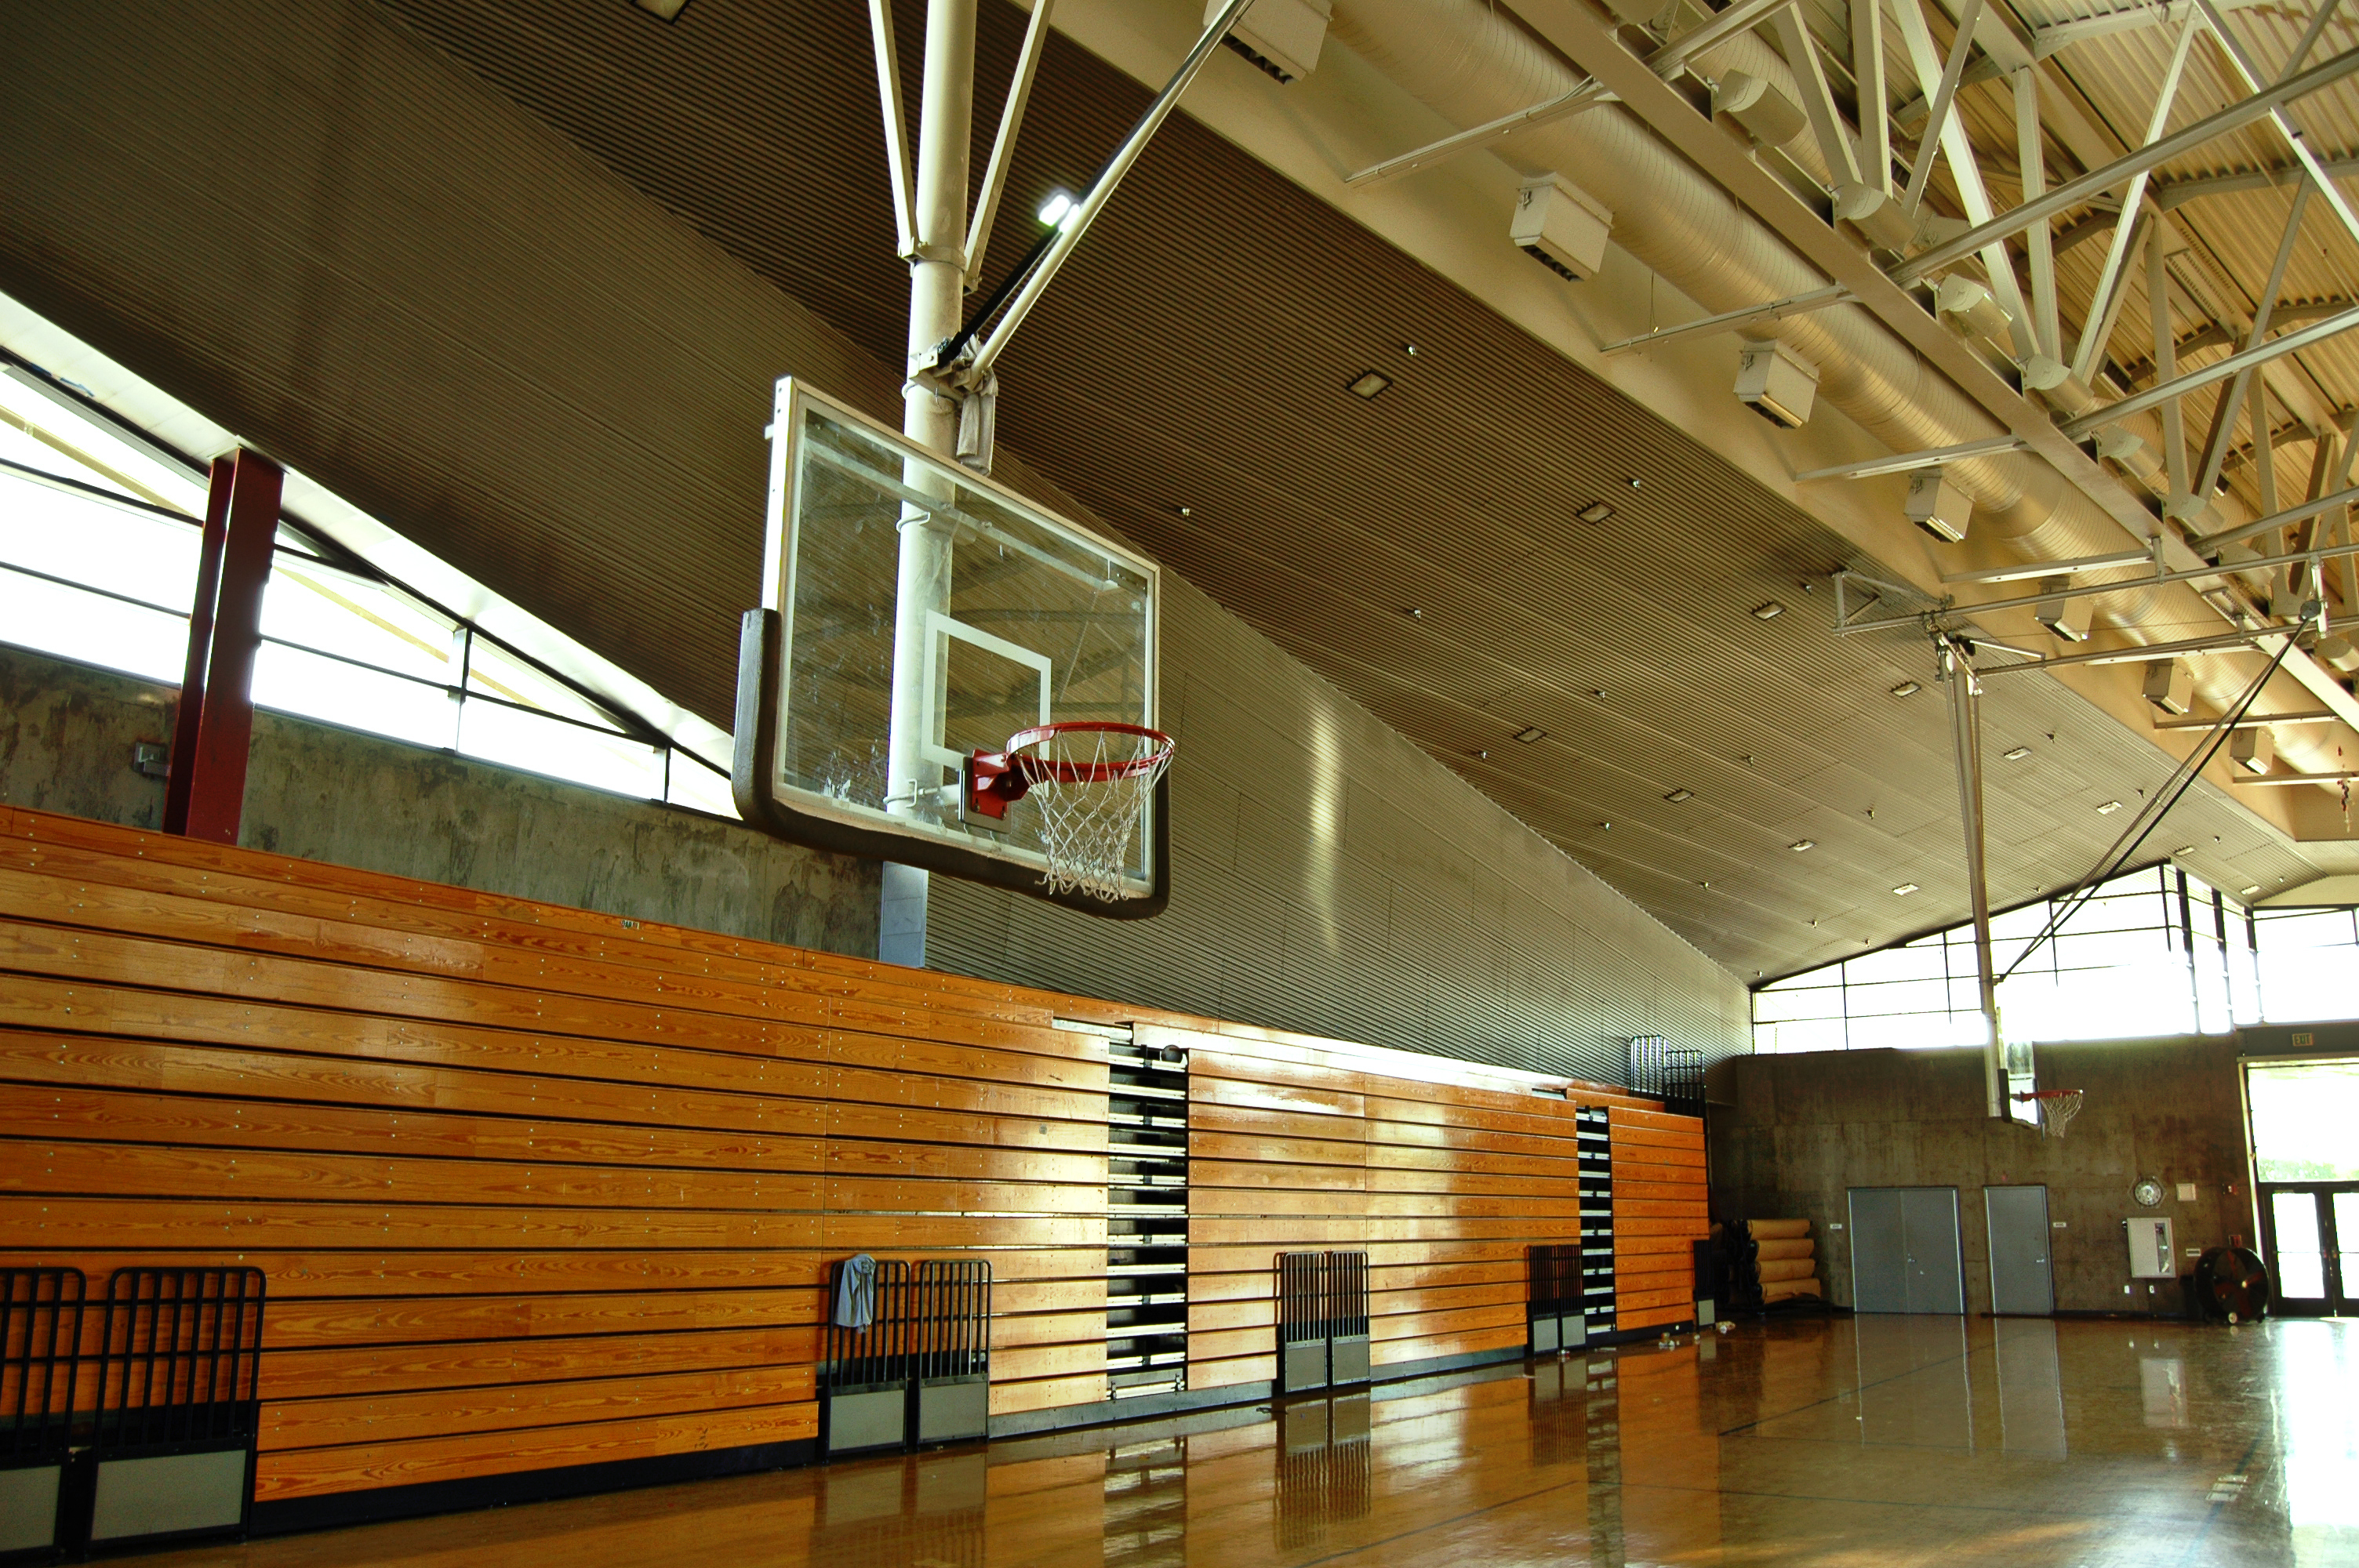 A high school gym with stacked bleachers and a basketball hoop